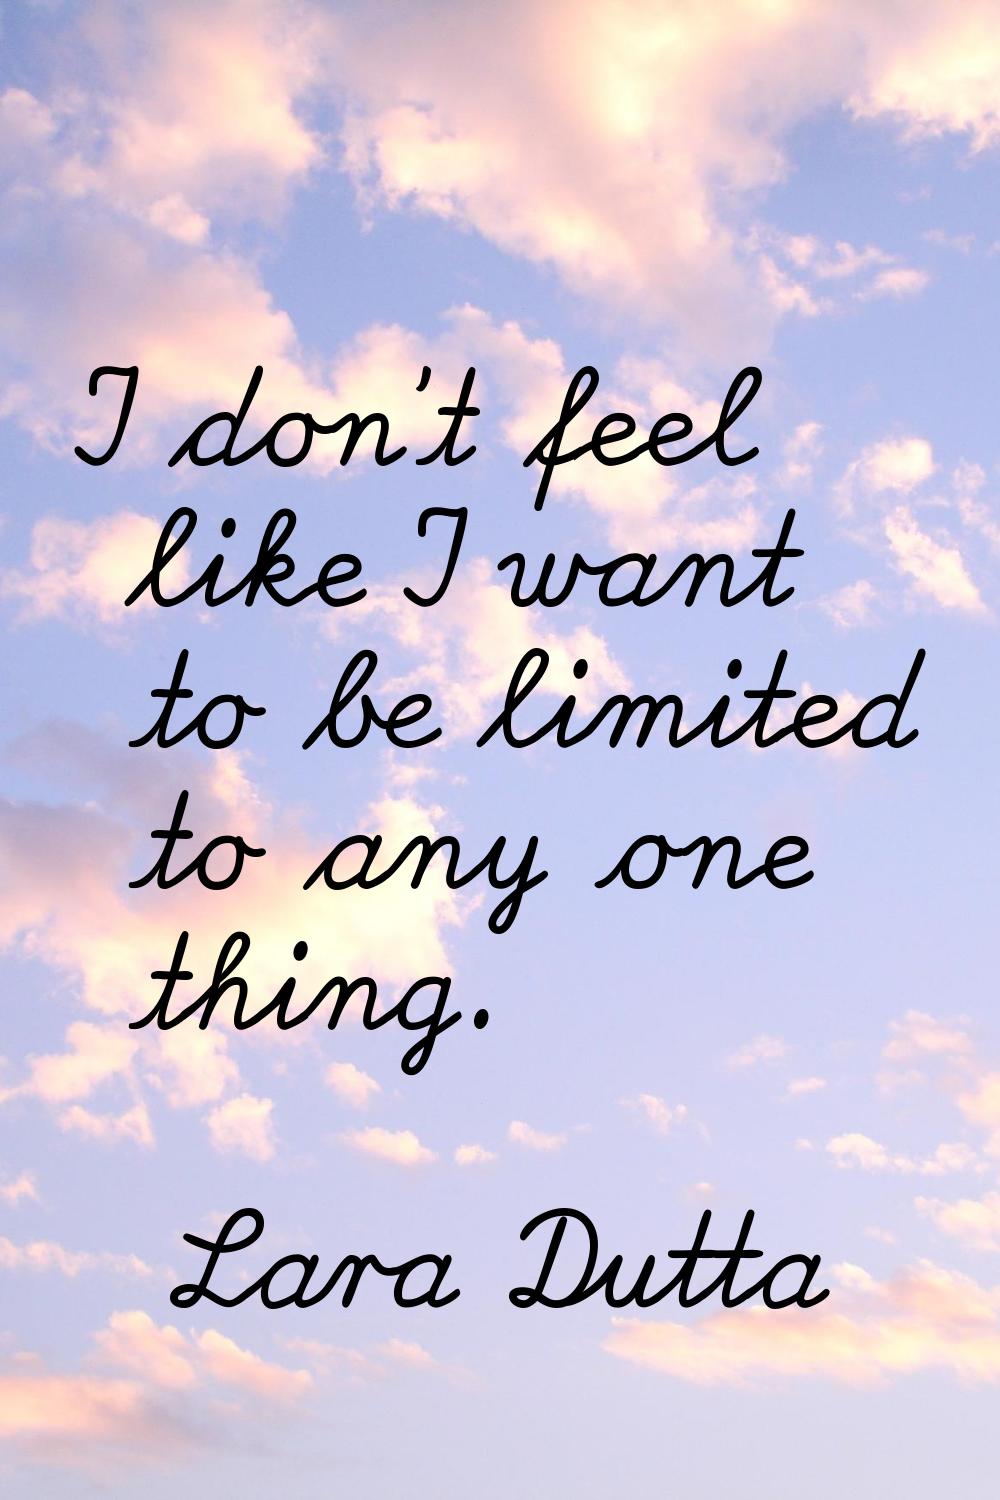 I don't feel like I want to be limited to any one thing.